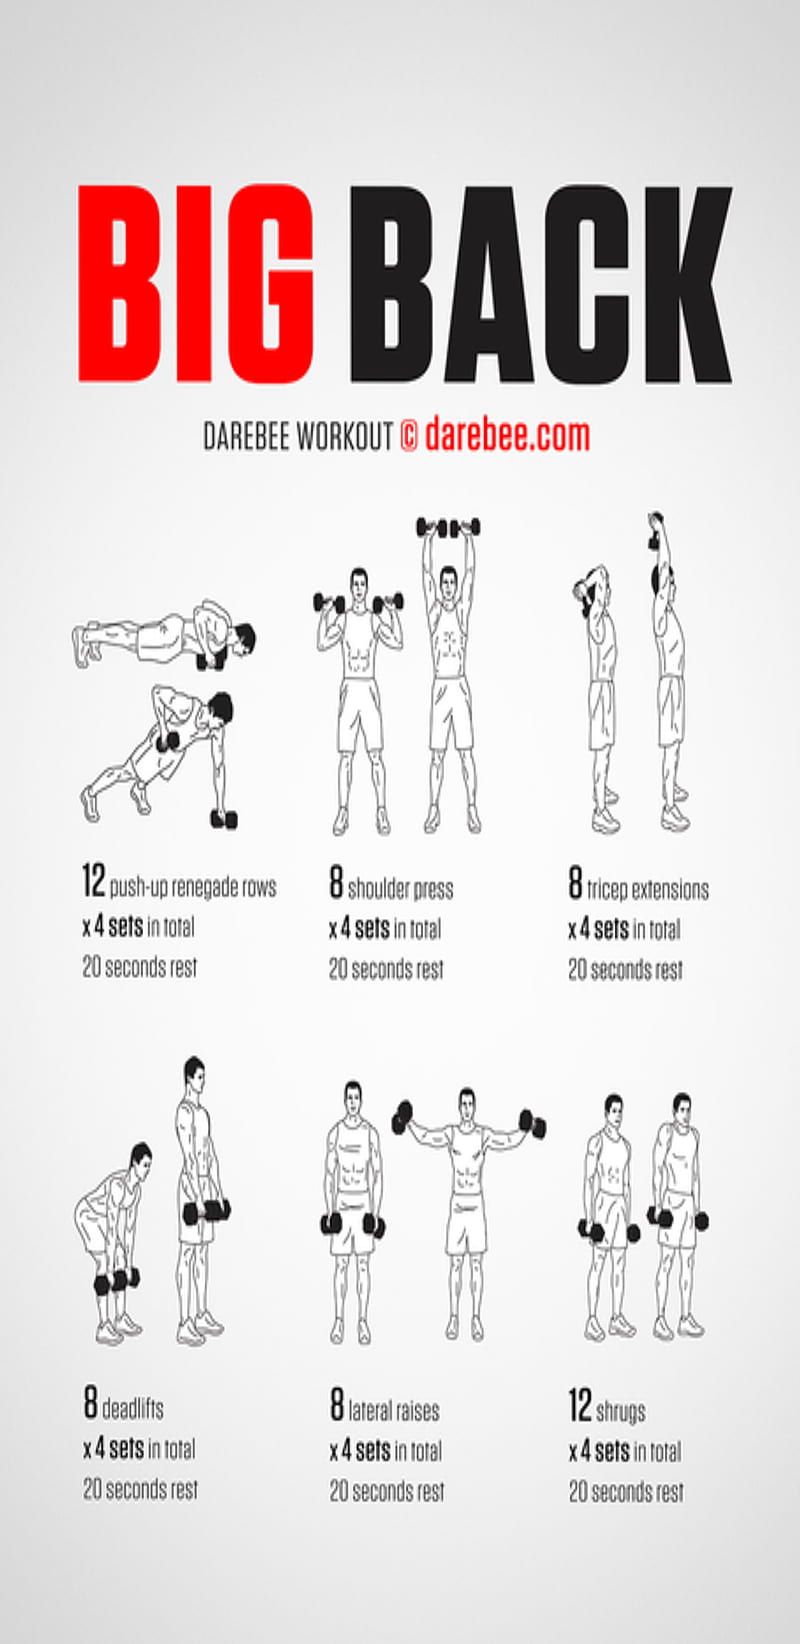 Big back fitness, gym, health, lift, men, muscle, weights, workout, HD phone wallpaper